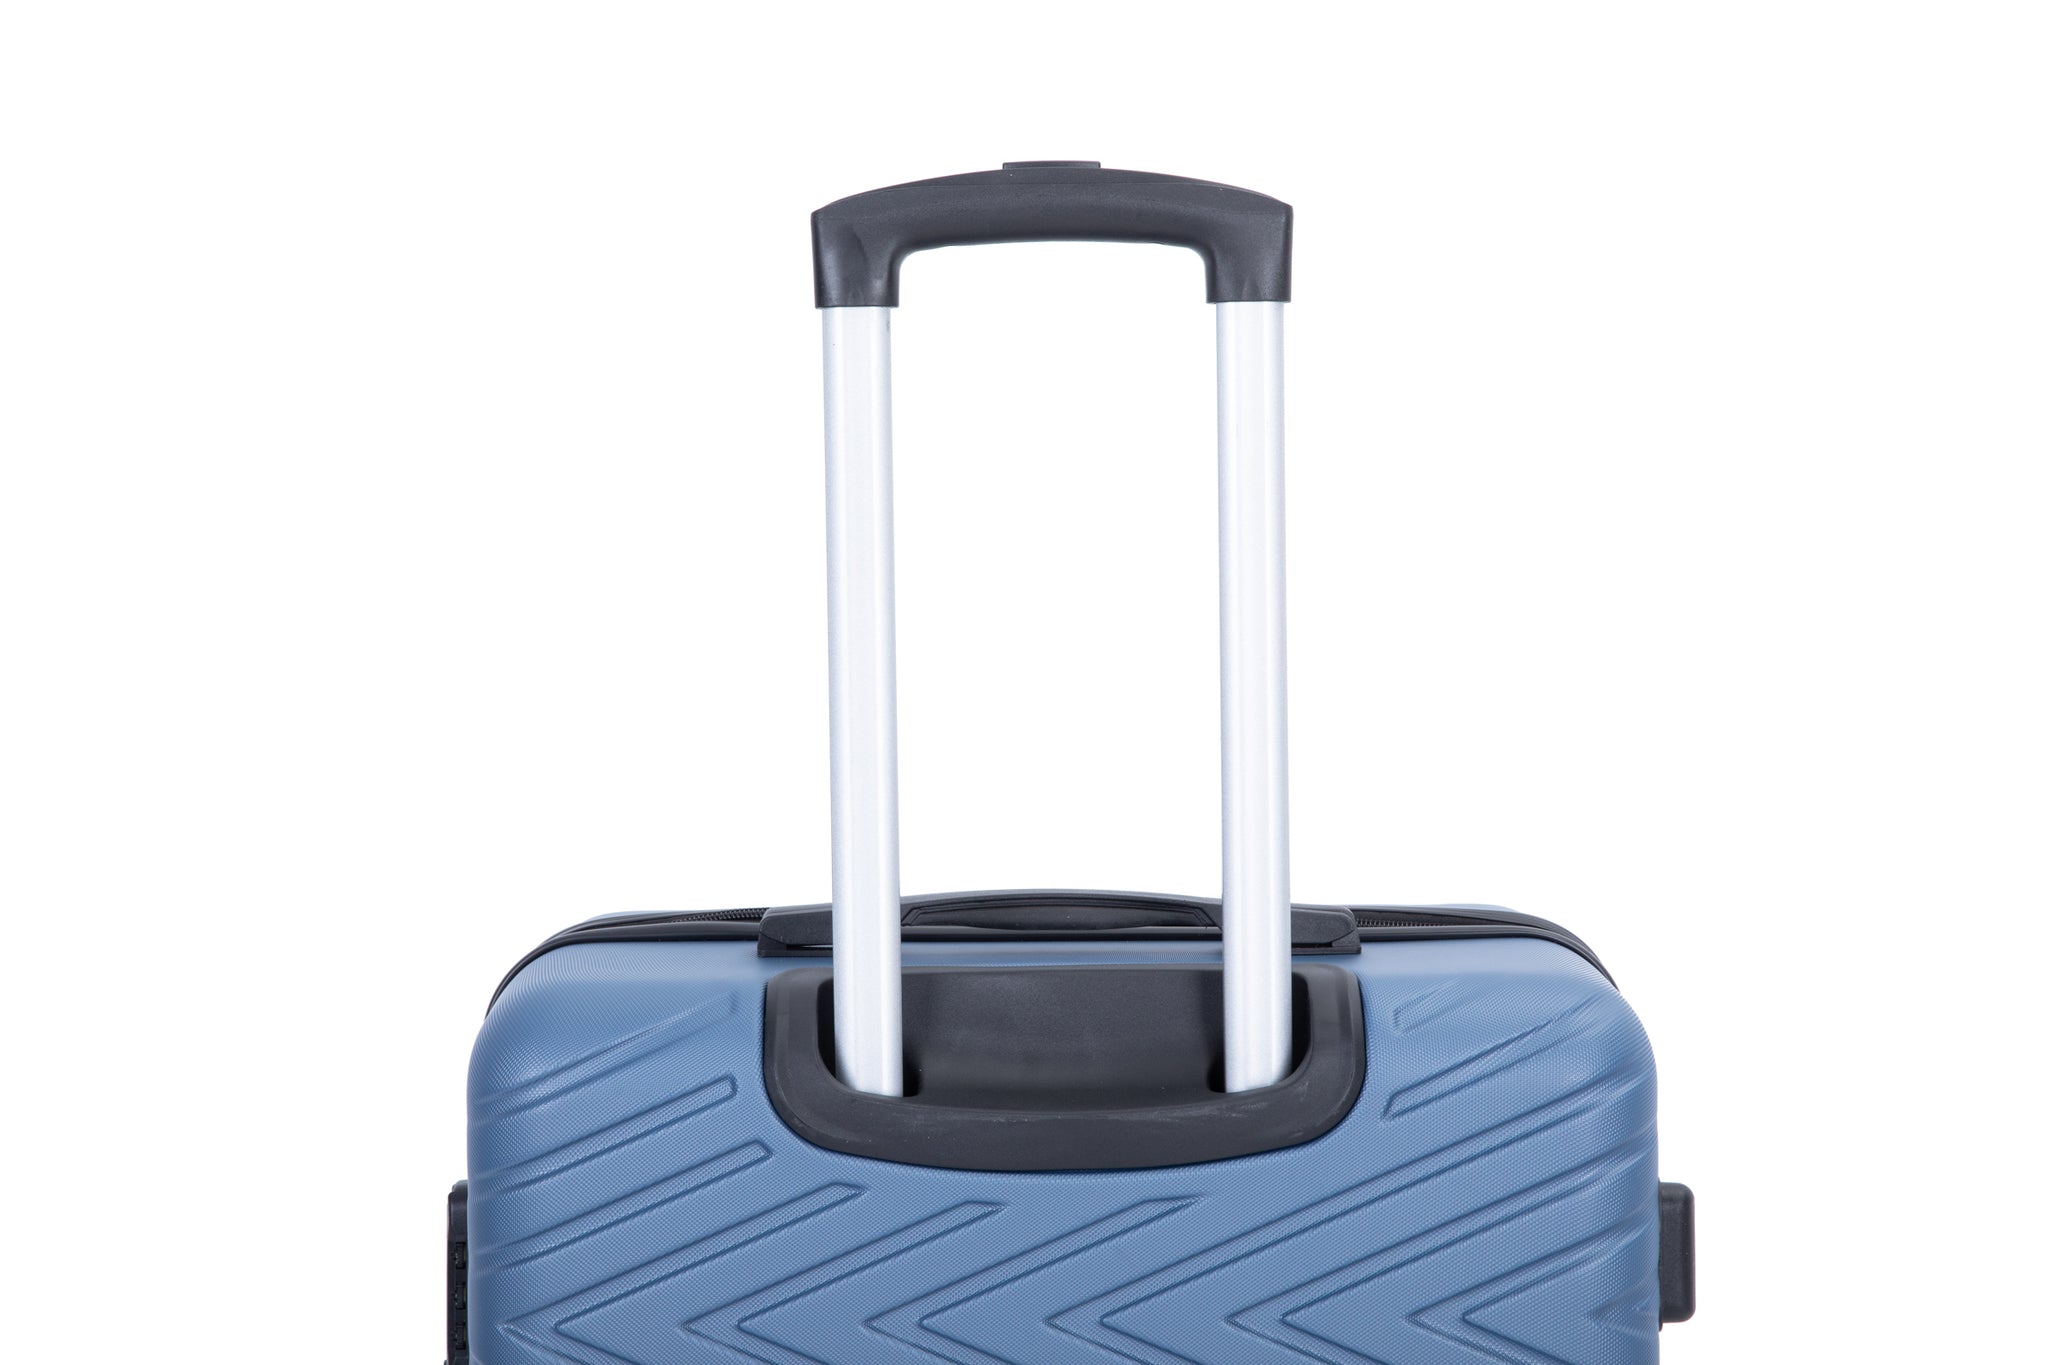 luggage 4 piece ABS lightweight suitcase with rotating blue-abs